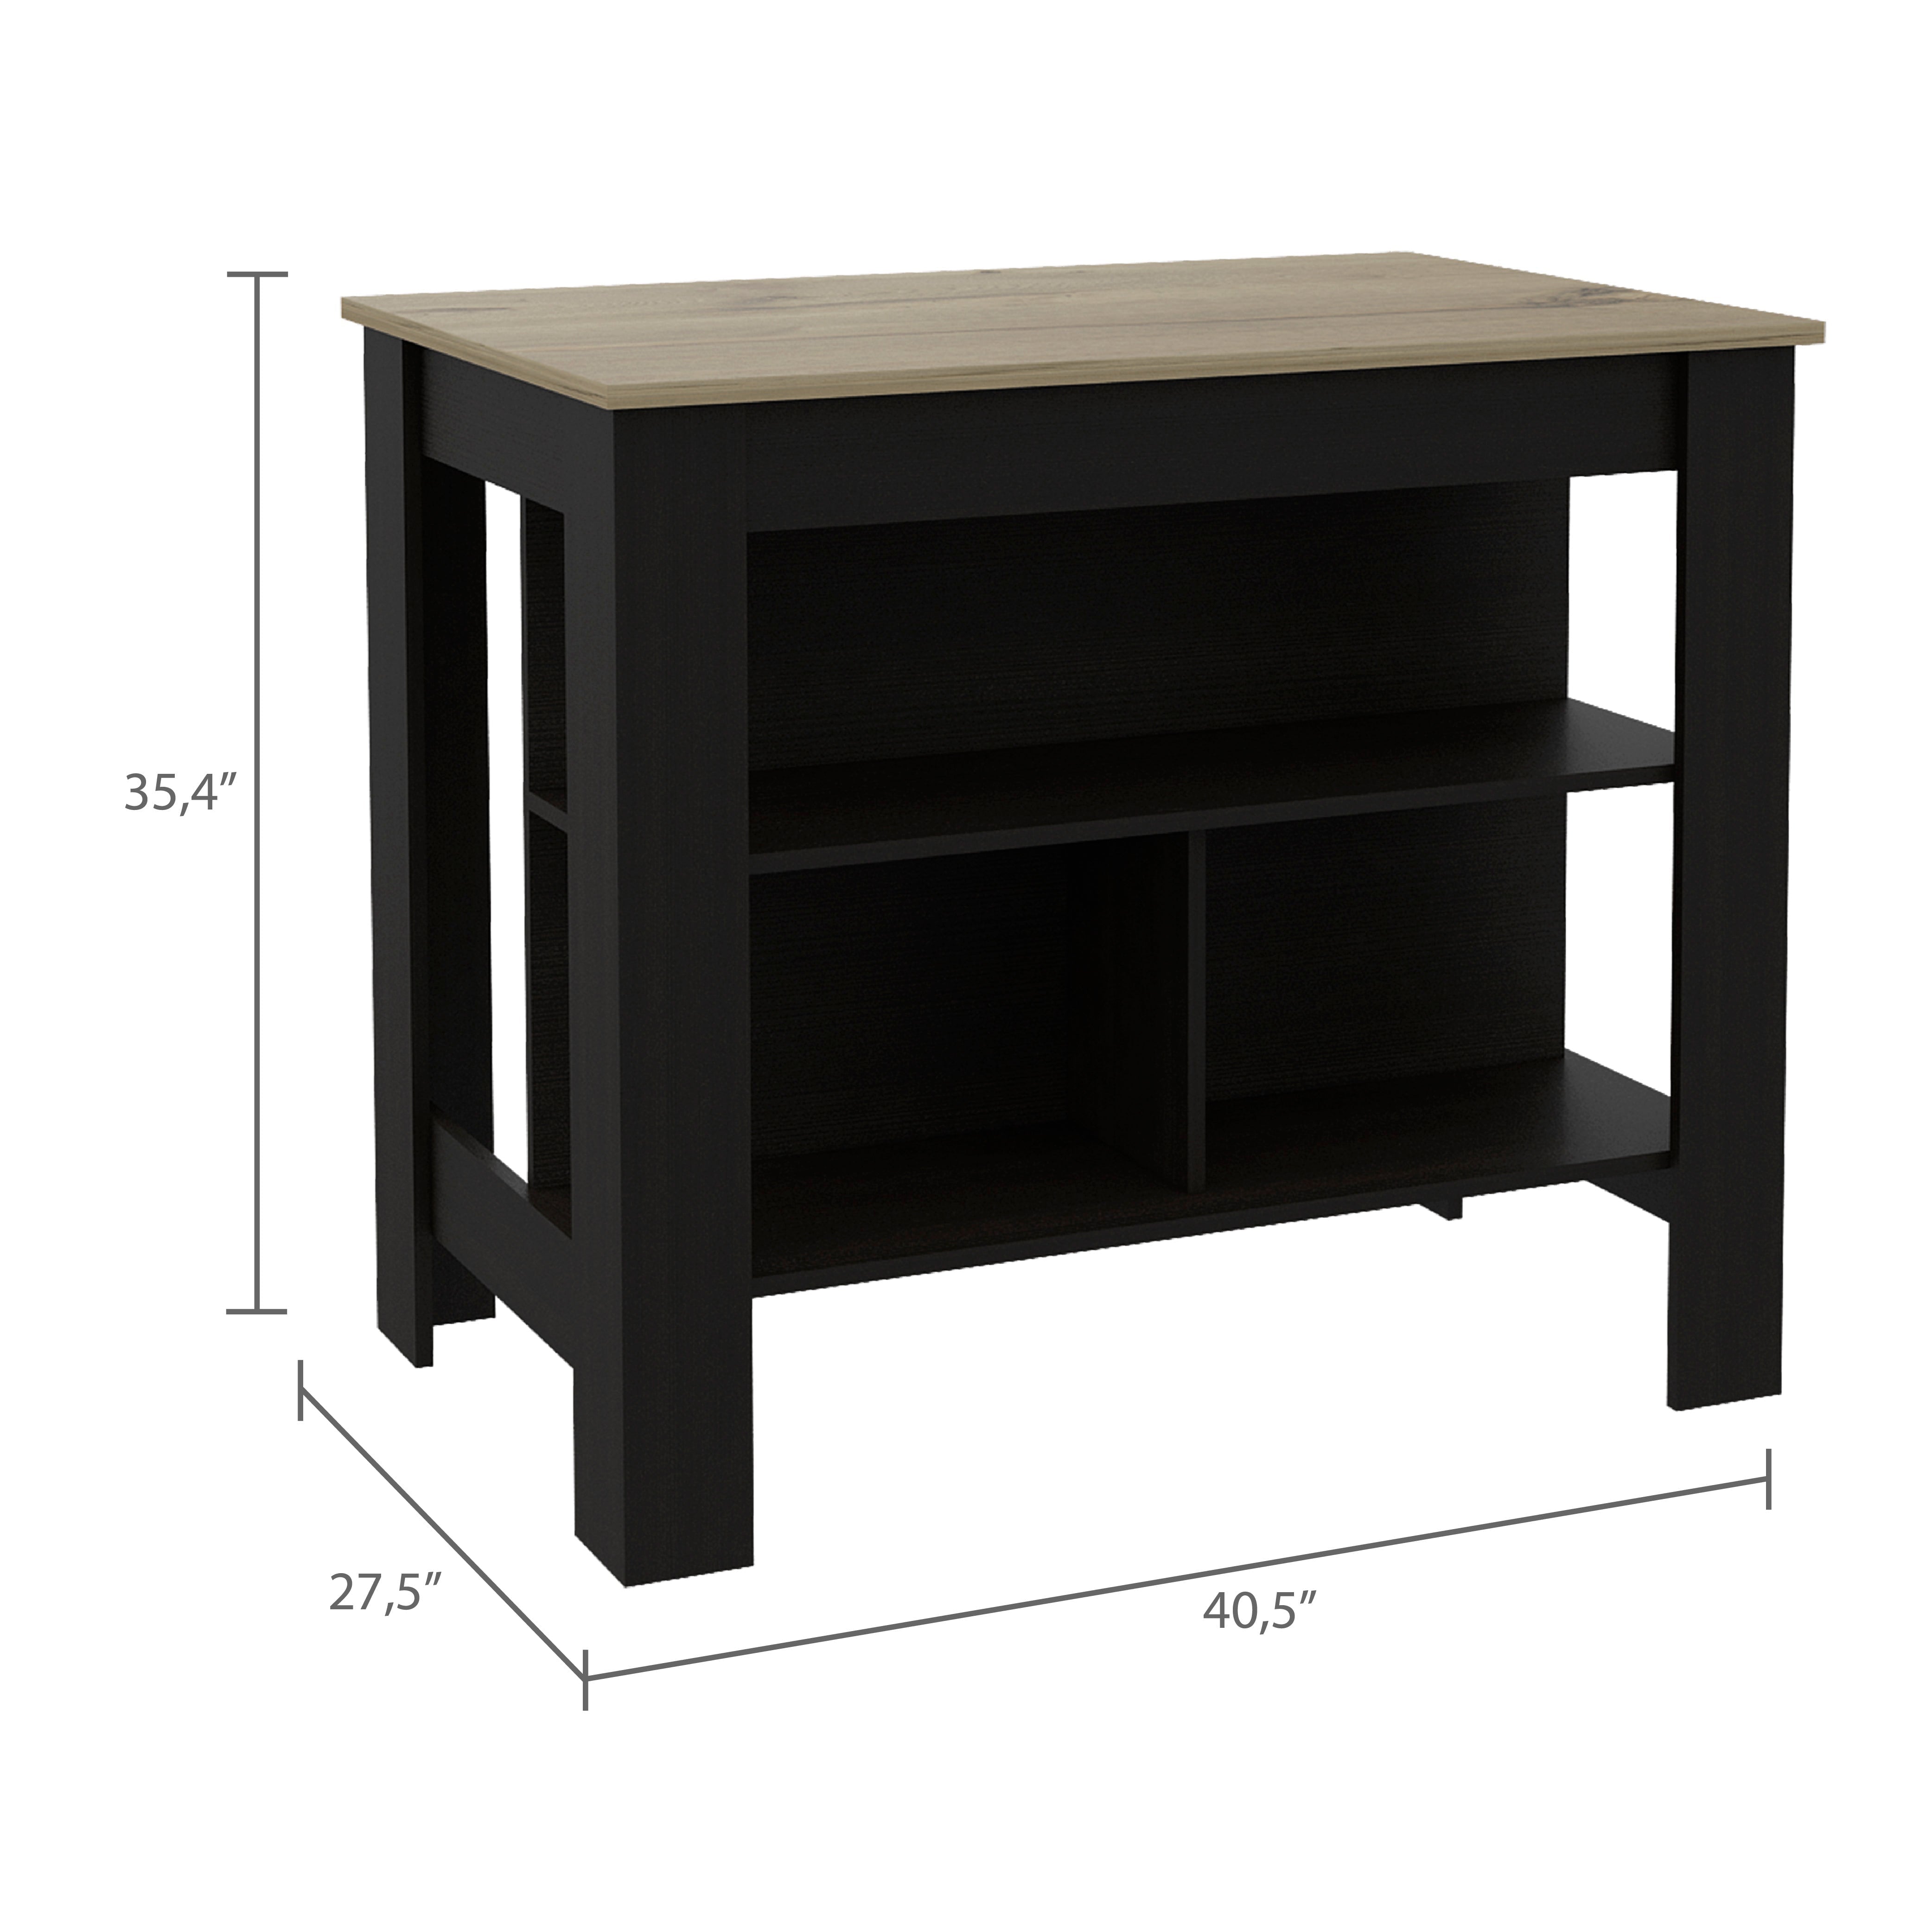 Boahaus Le Havre Black Painted Kitchen Island， Wood Tabletop